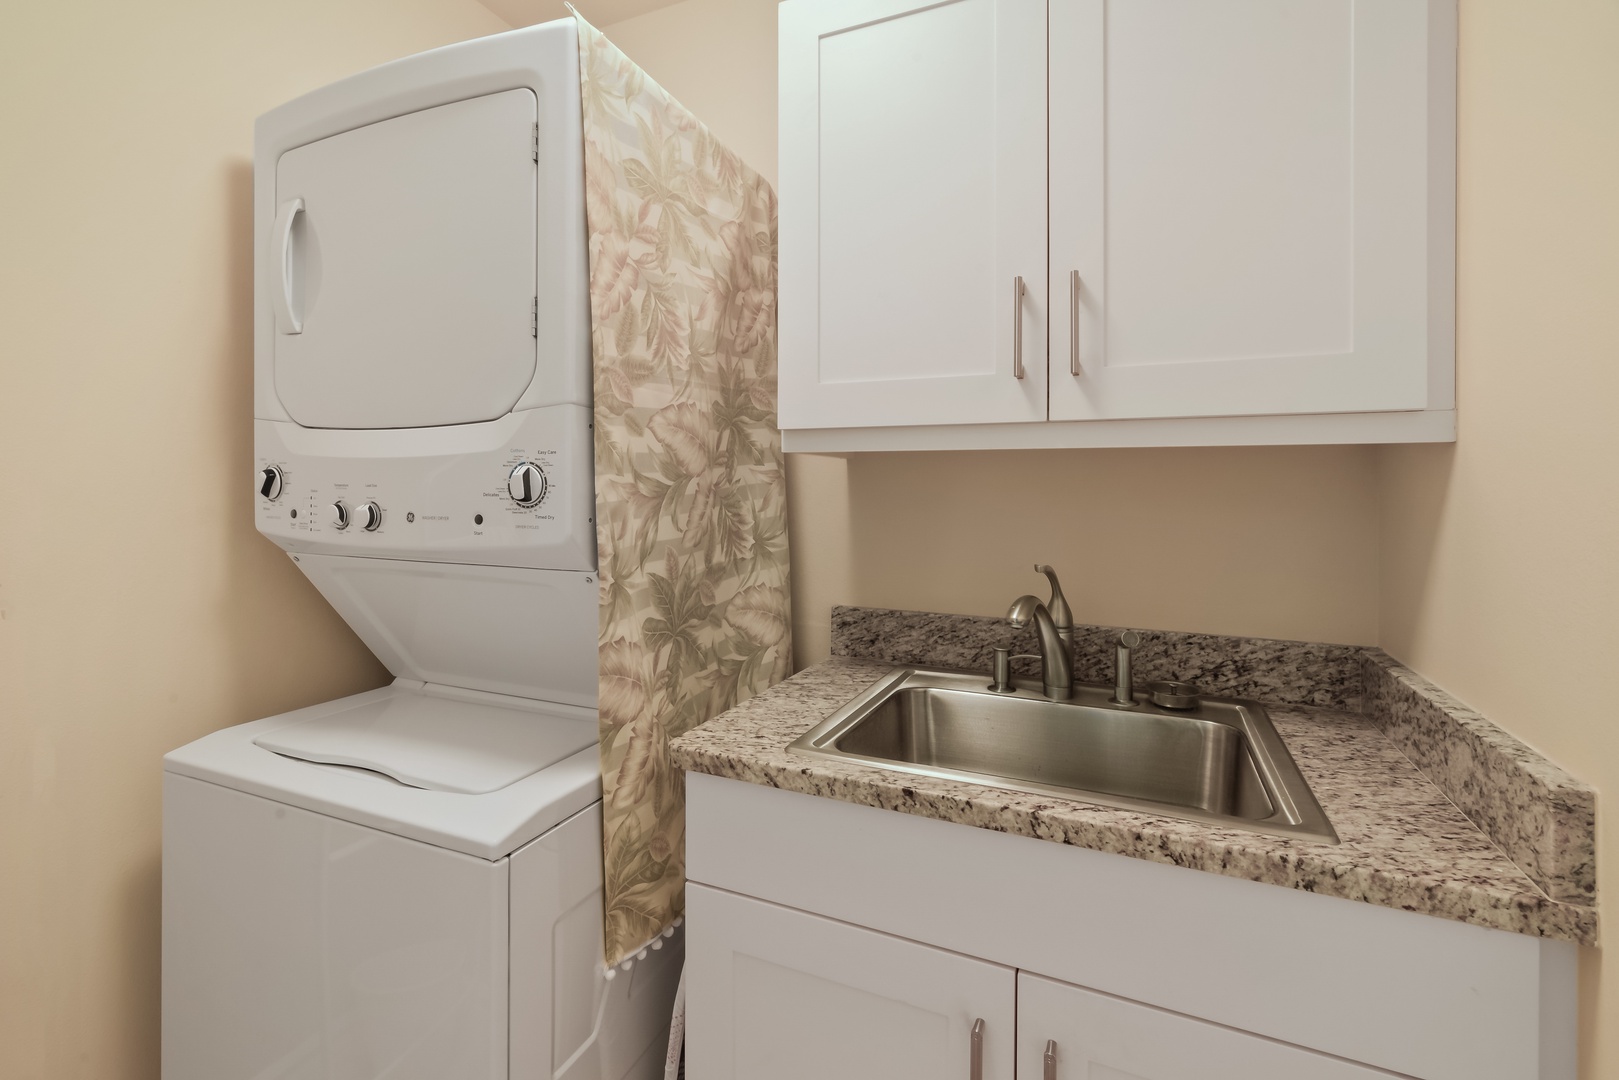 Princeville Vacation Rentals, Noelani Kai - Vacay complete with our dedicated laundry area, equipped with a washer/dryer, sink with cabinets for extra storage, designed for your convenience.